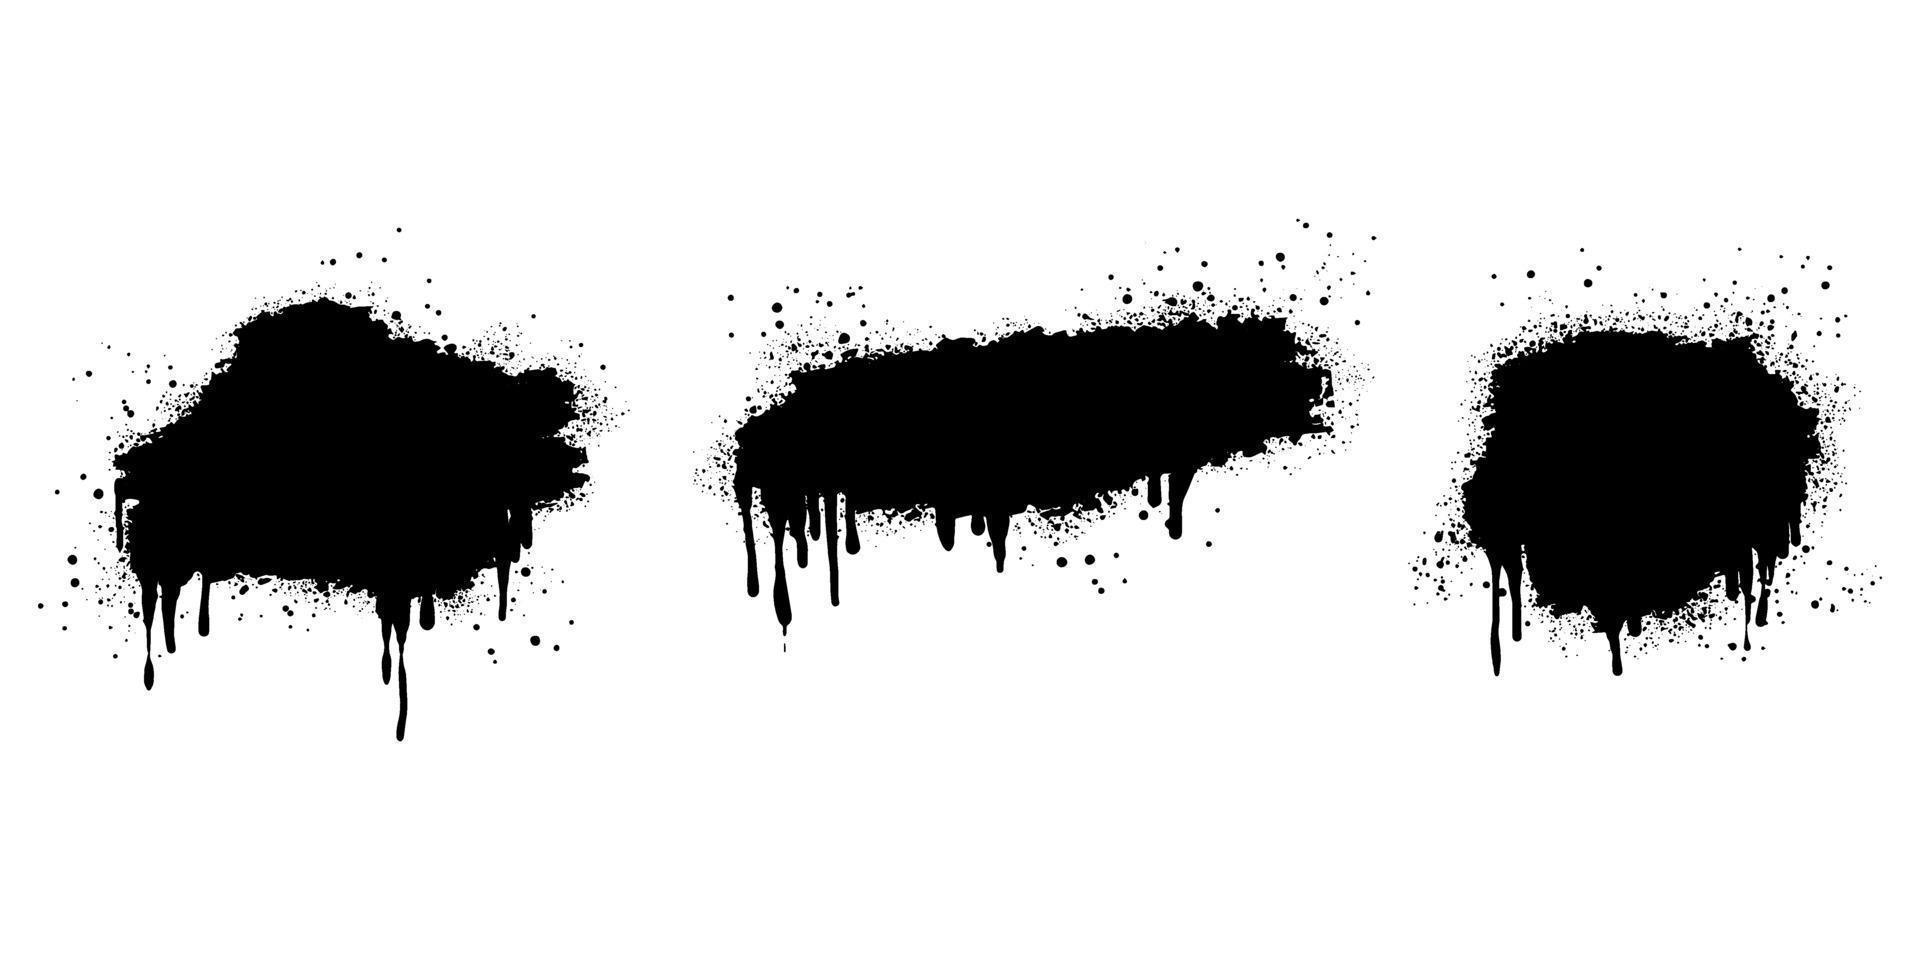 Set of Spray painted graffiti textures. Spray Paint Vector Element isolated on White Background. vector illustration